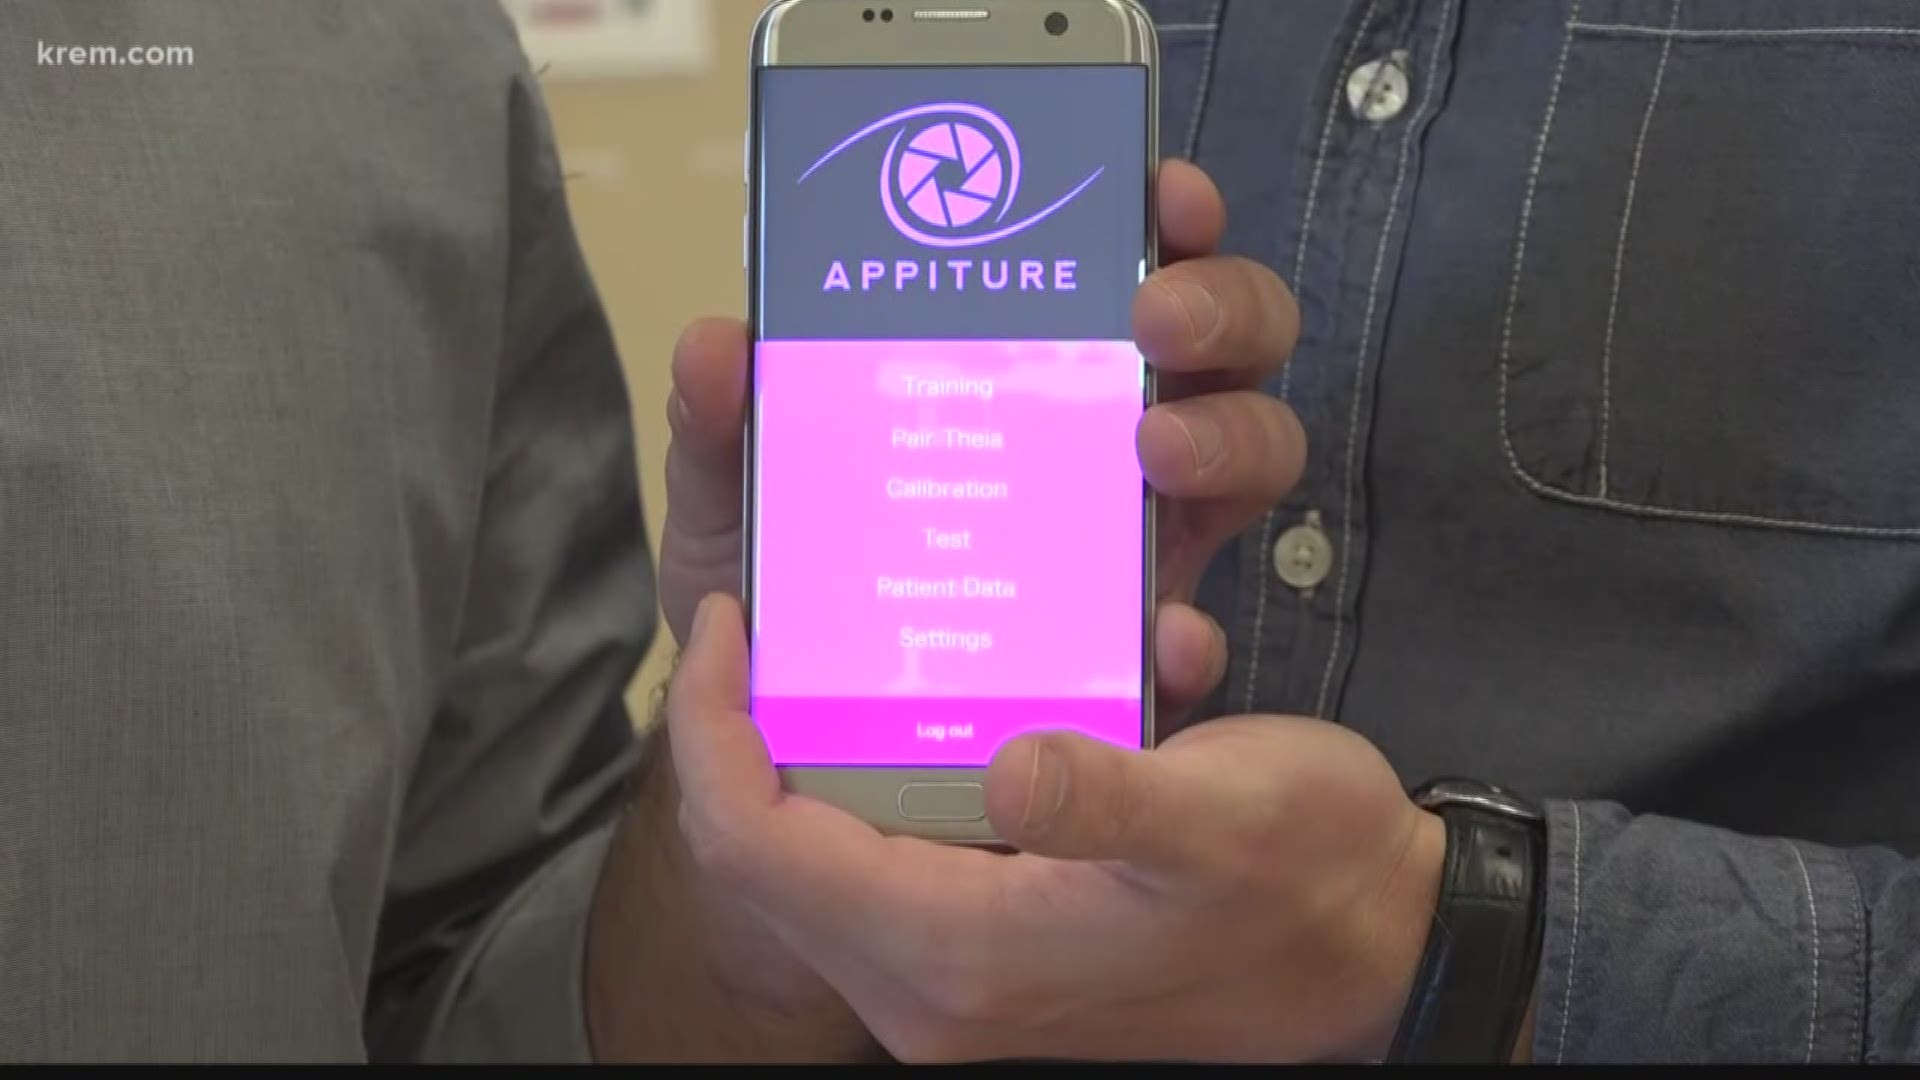 Appiture is a camera integrated app that will assist pediatricians in the process of screening for autism.